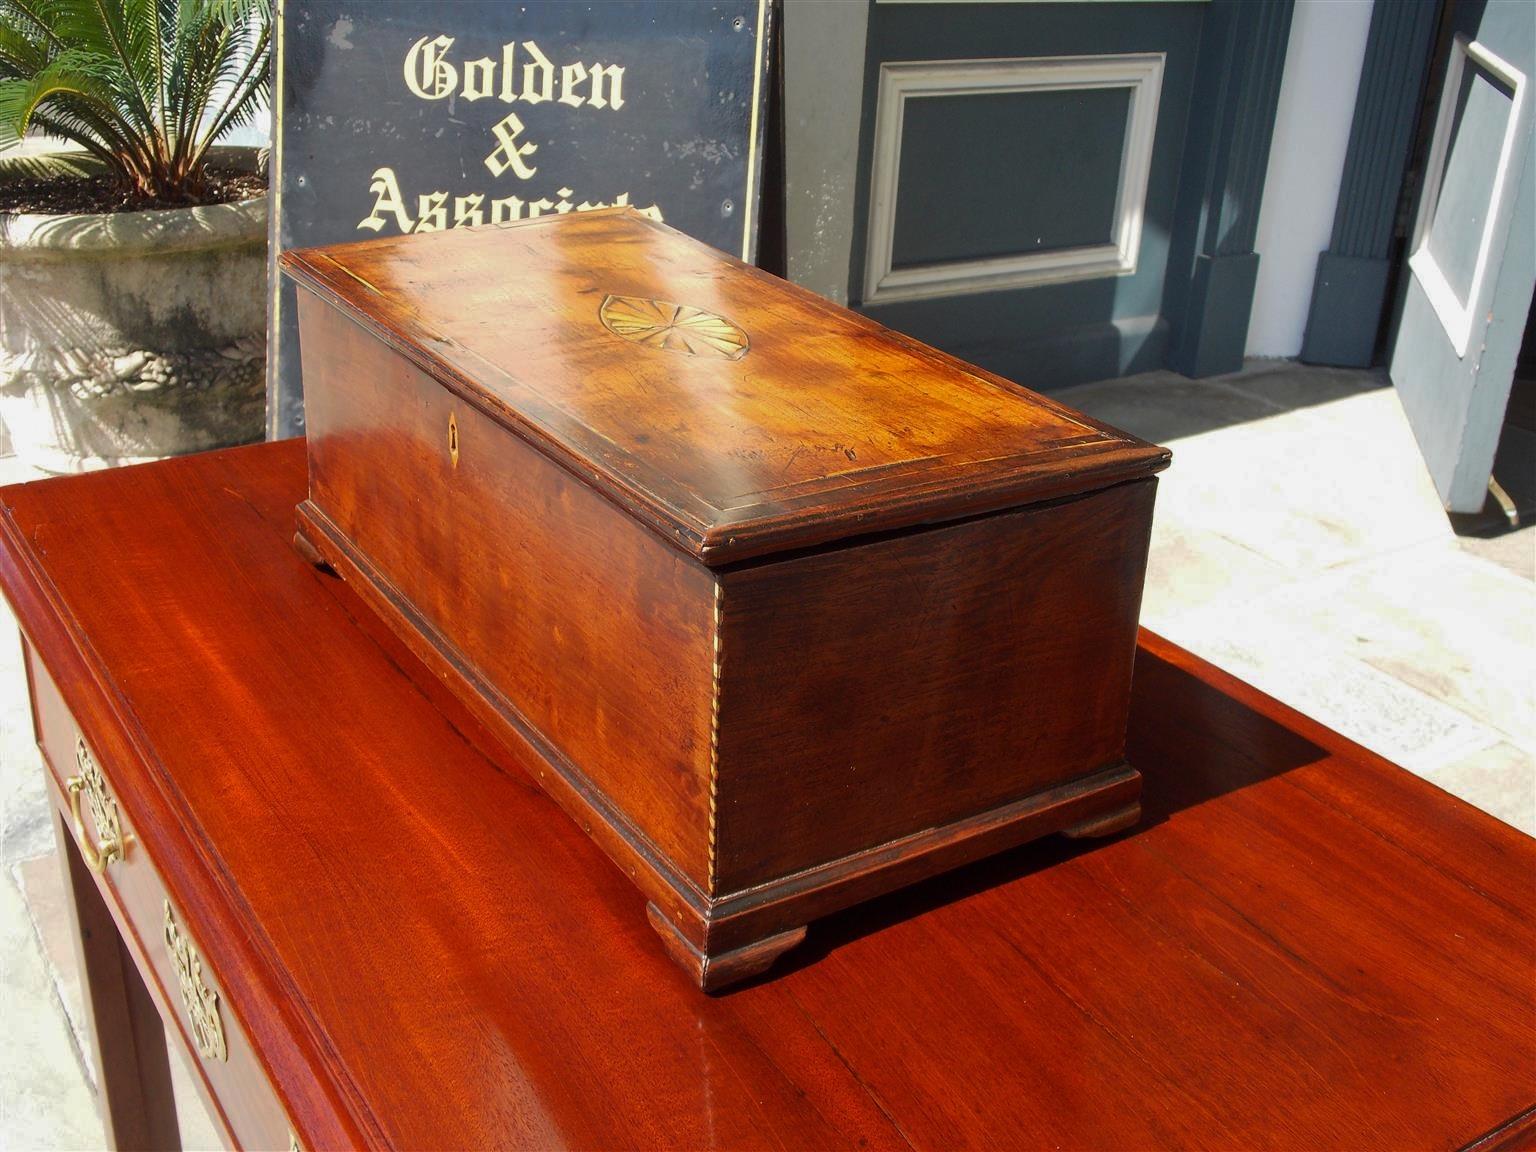 Hand-Carved American Walnut Satinwood Inlaid Valuables Box with Original Feet, Circa 1780 For Sale